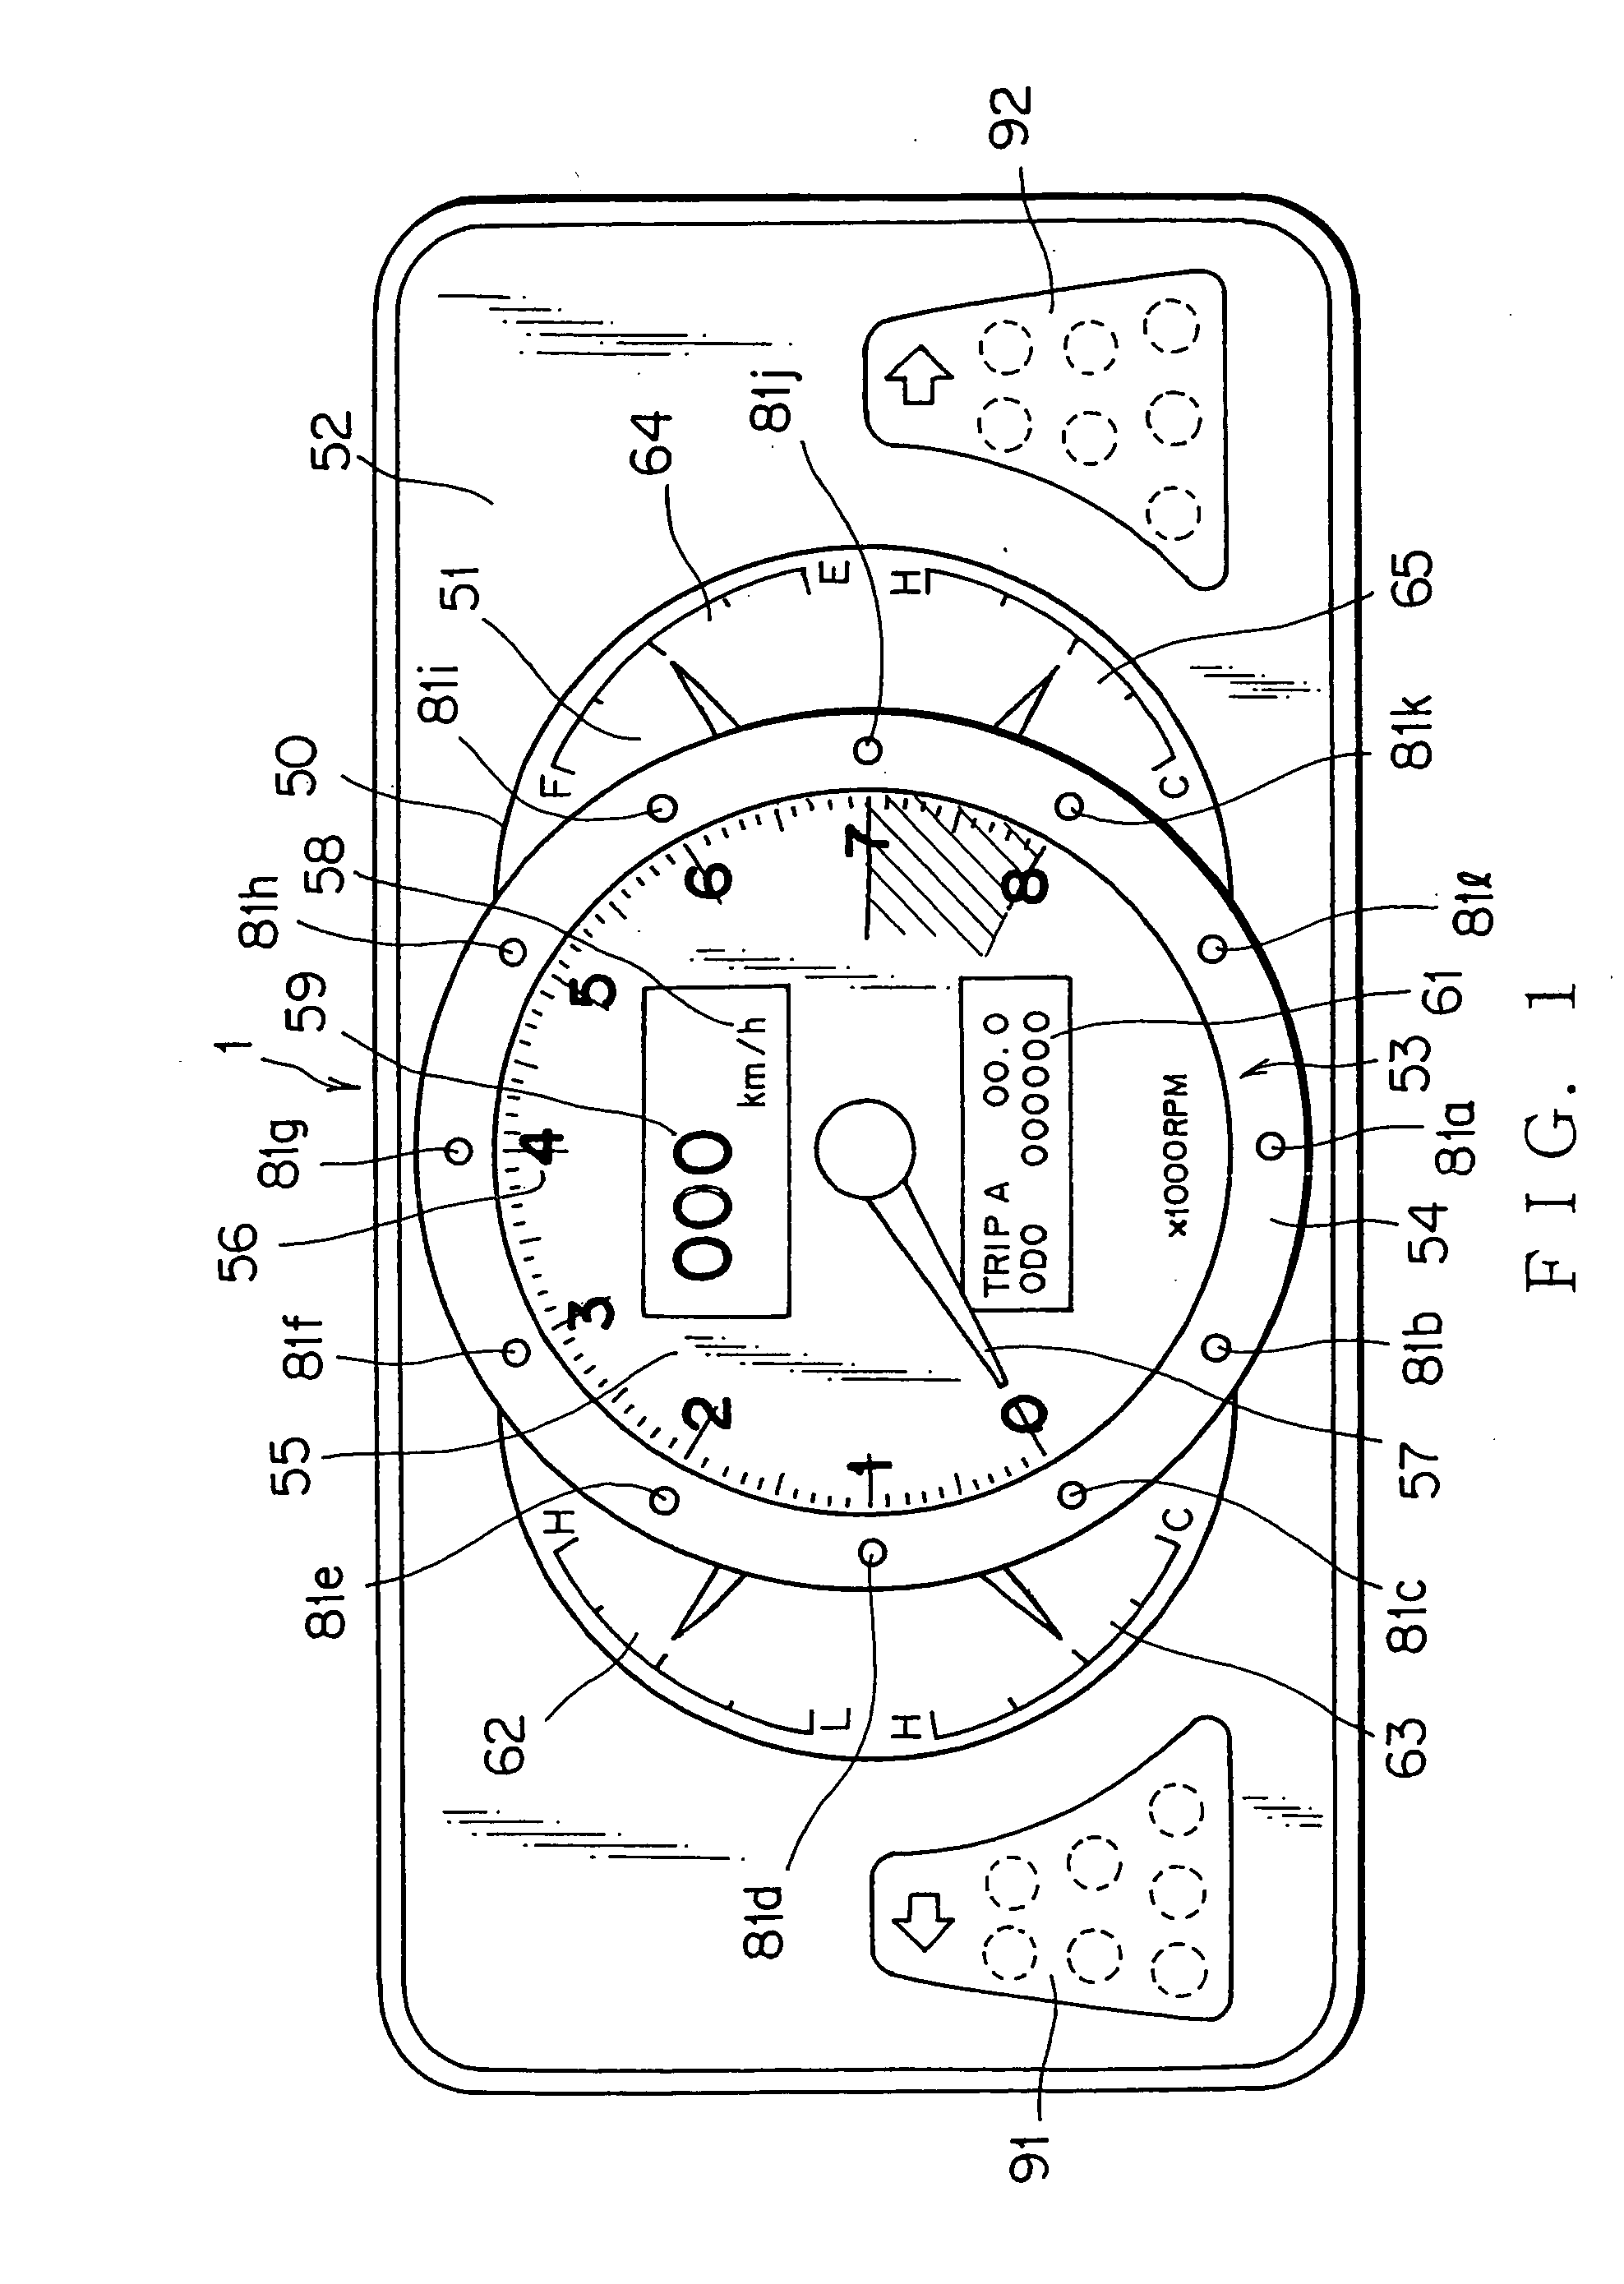 Display unit for vehicle